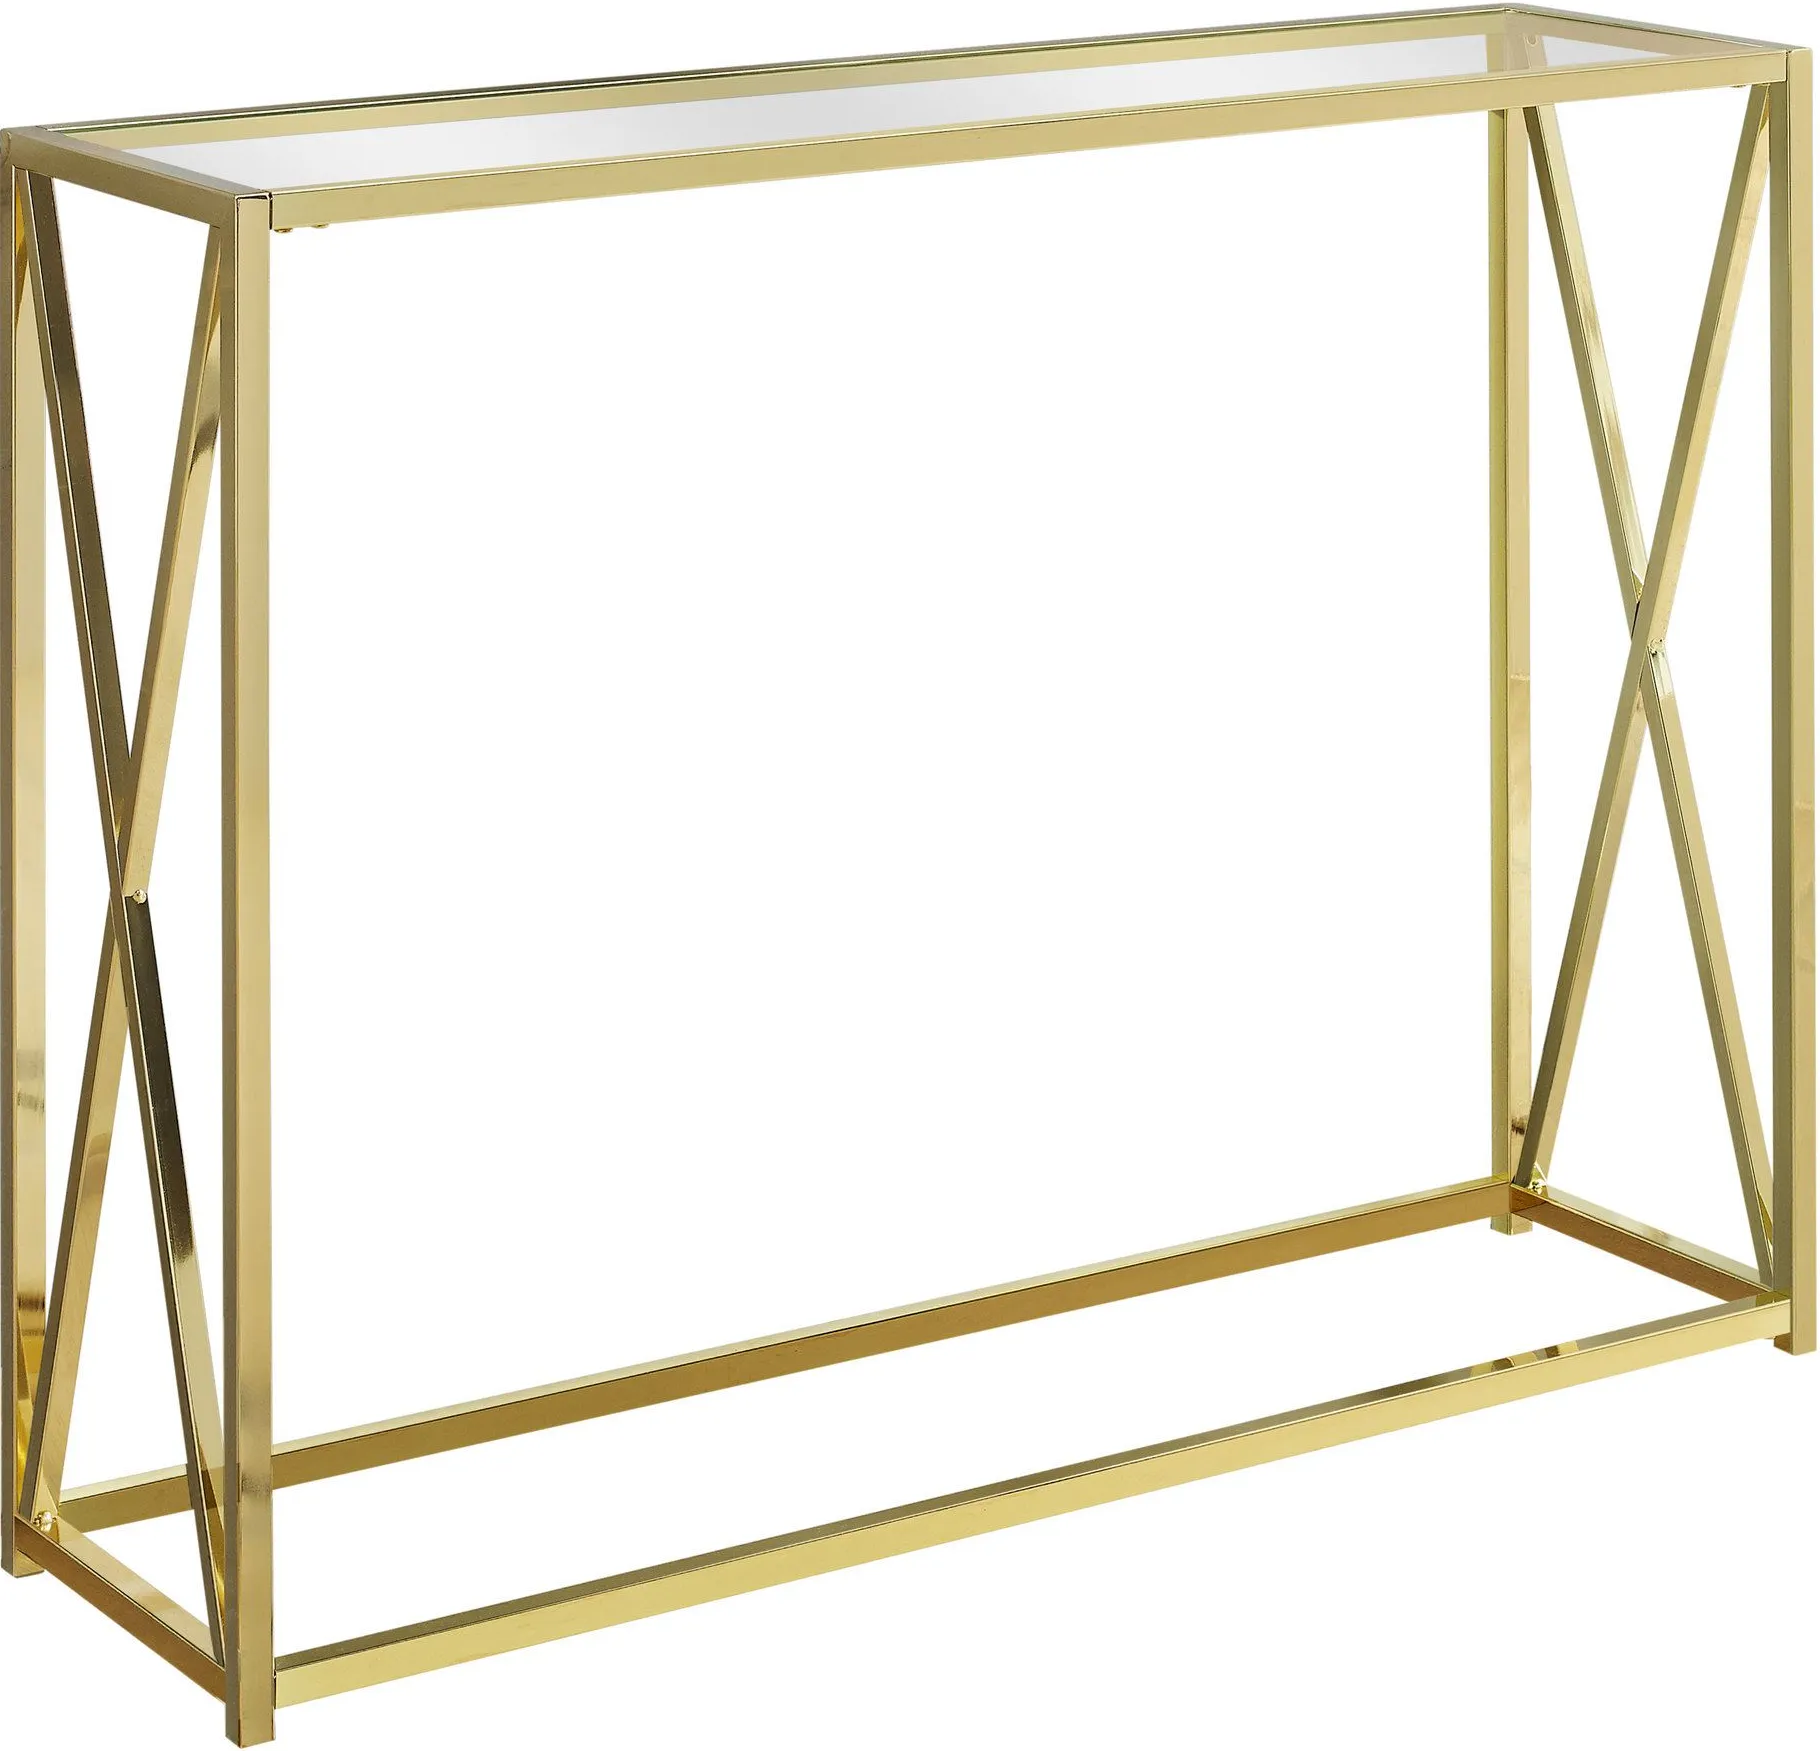 Accent Table, Console, Entryway, Narrow, Sofa, Living Room, Bedroom, Metal, Tempered Glass, Gold, Clear, Contemporary, Modern